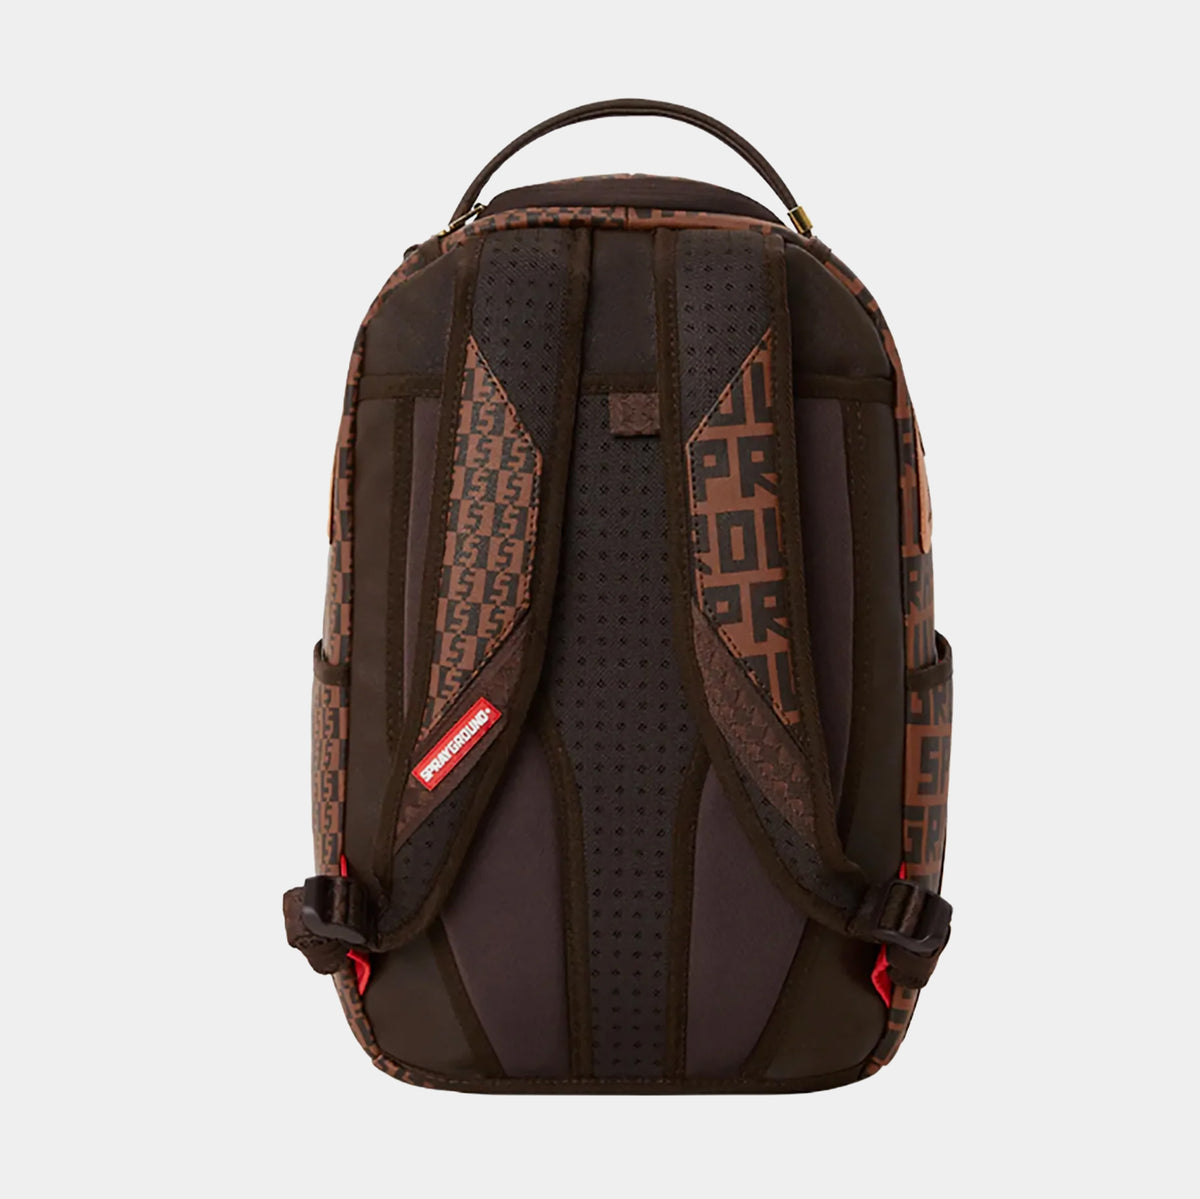 Sprayground New Bubbly Japan Mens Backpack Brown Multi B5052 – Shoe Palace